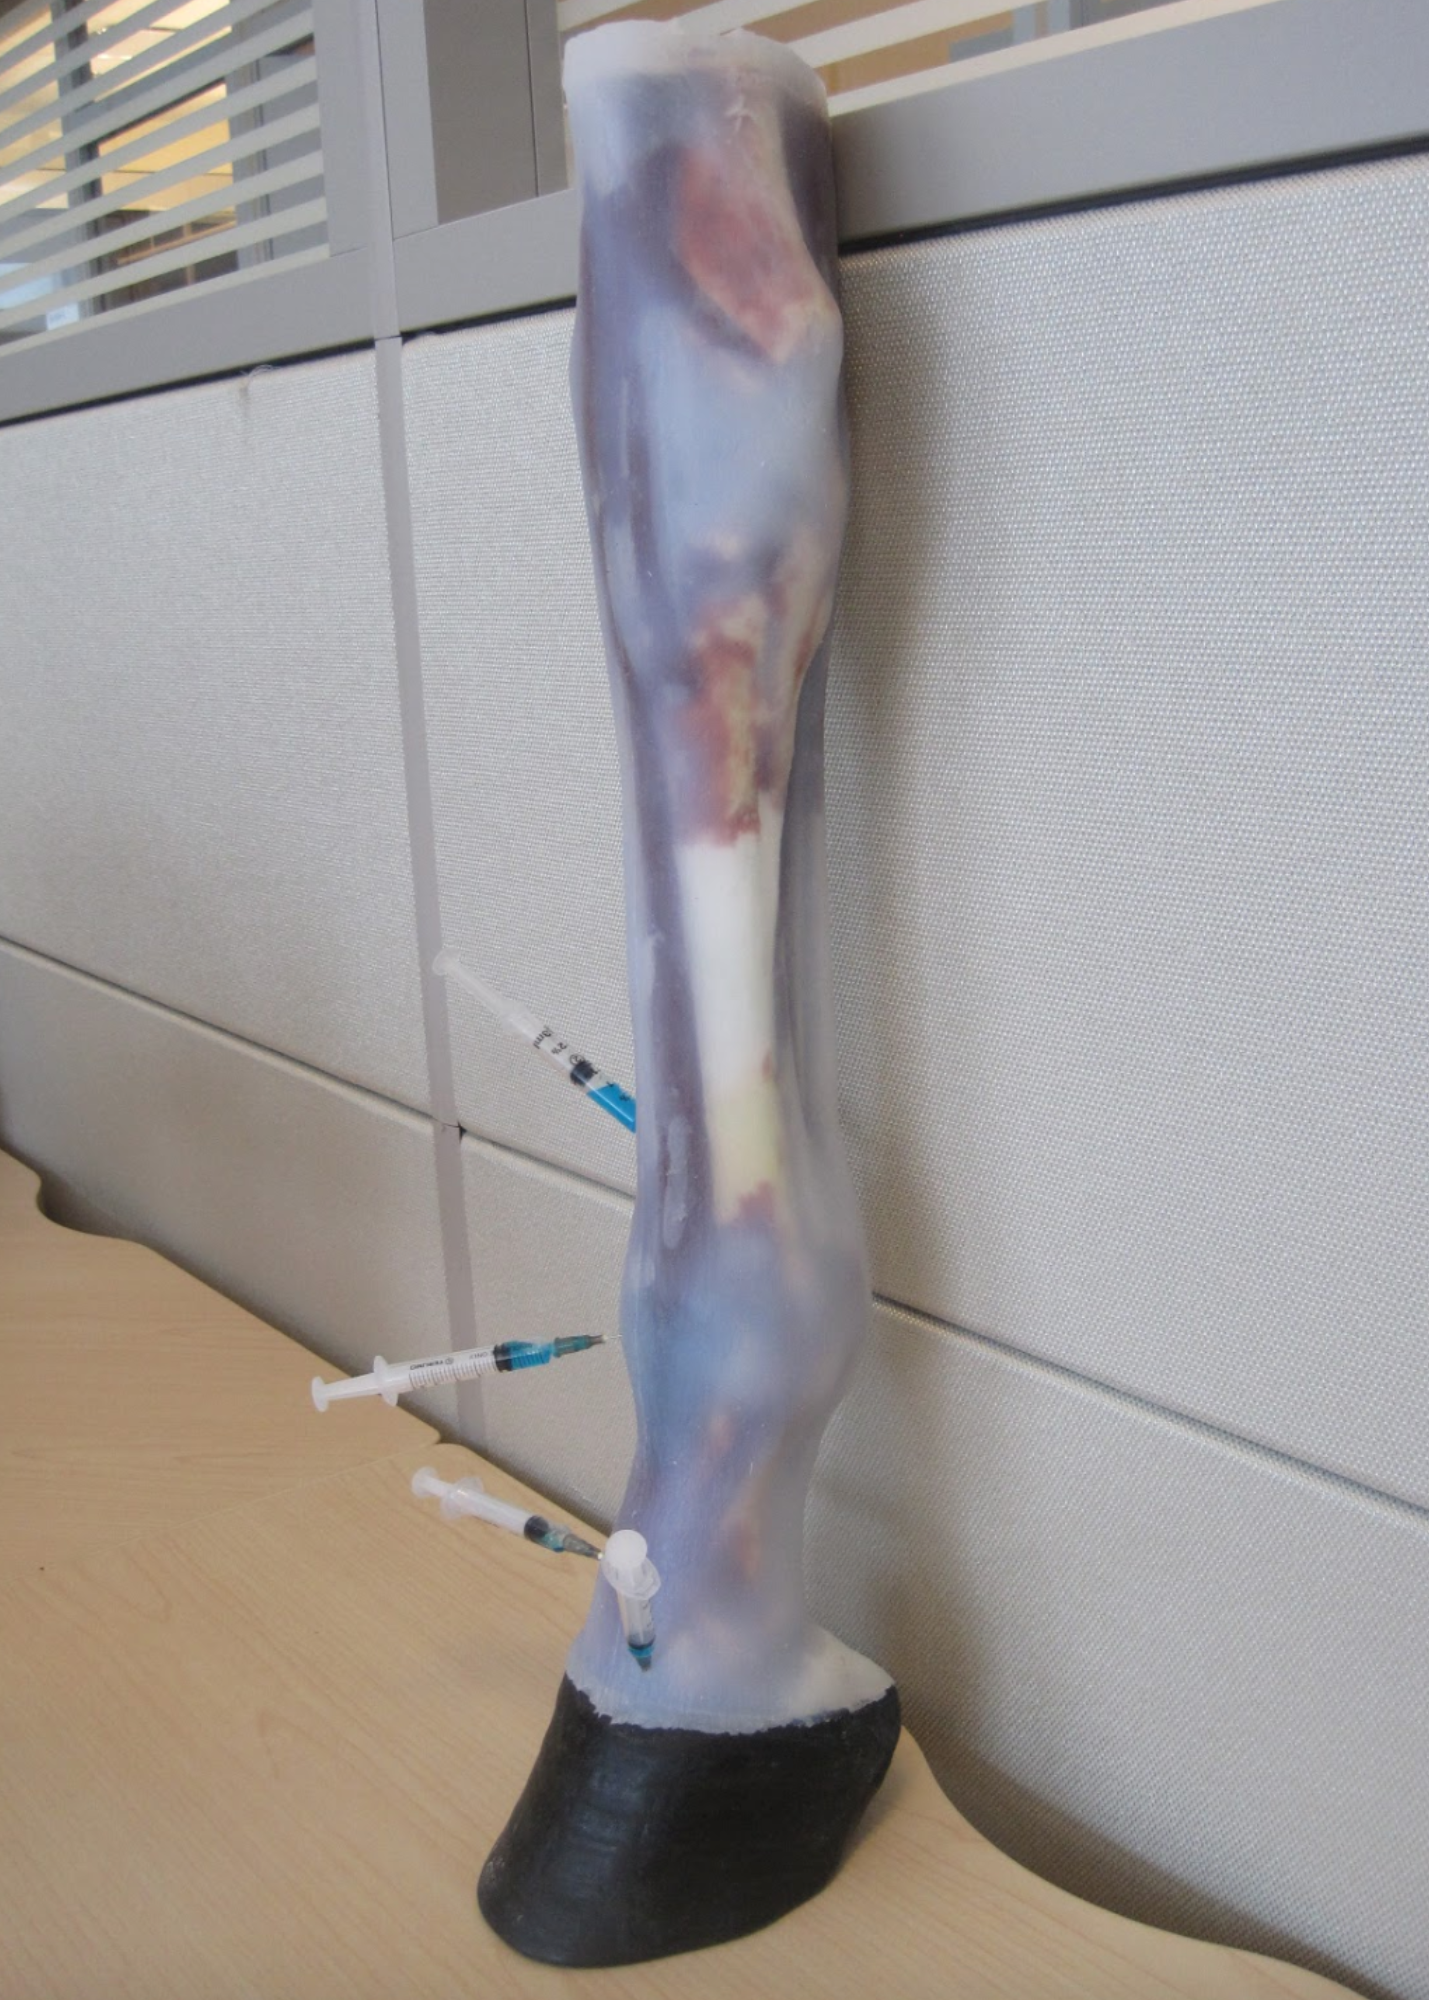 The initial prototype distal limb model with skin being tested at UCVM with various injection points to evaluate its perfomance.